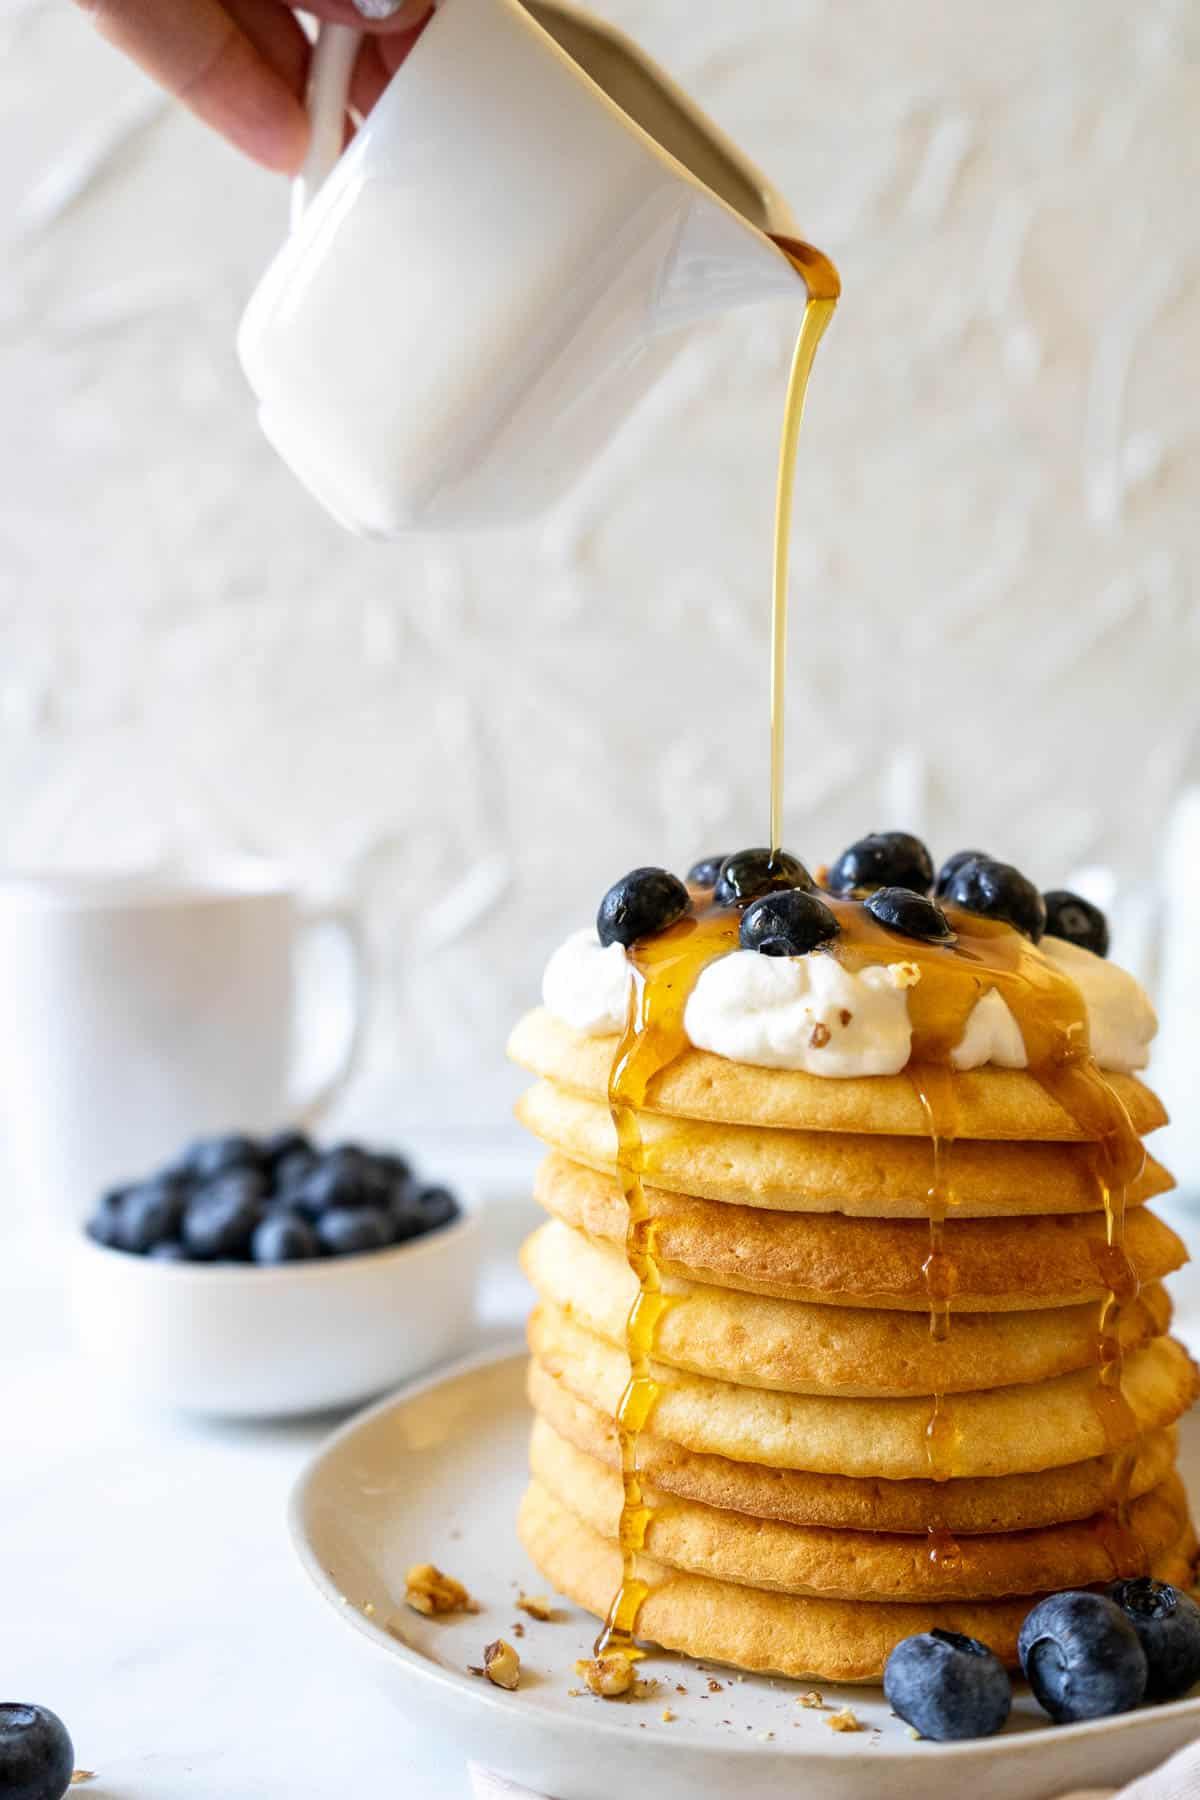 Four air fryer pancakes on a plate with whipped cream, blueberries, and maple syrup.